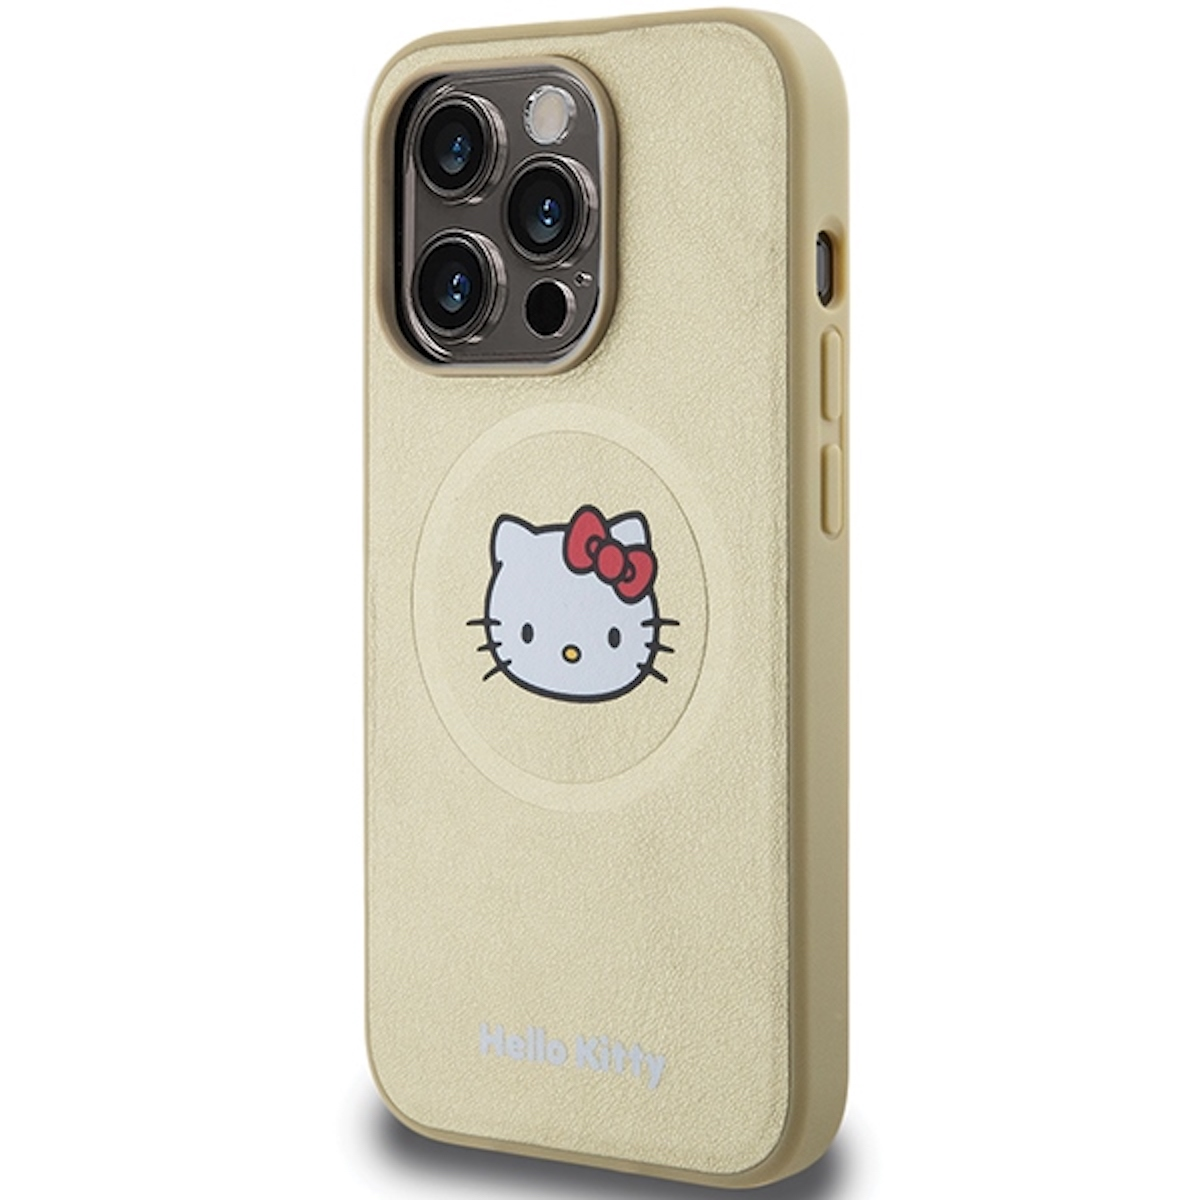 Max, Pro CHEFMADE iPhone Schutzhülle Apple, Leather Head Kitty Gold KITTY 15 HELLO Design, Backcover, MagSafe Cover BY